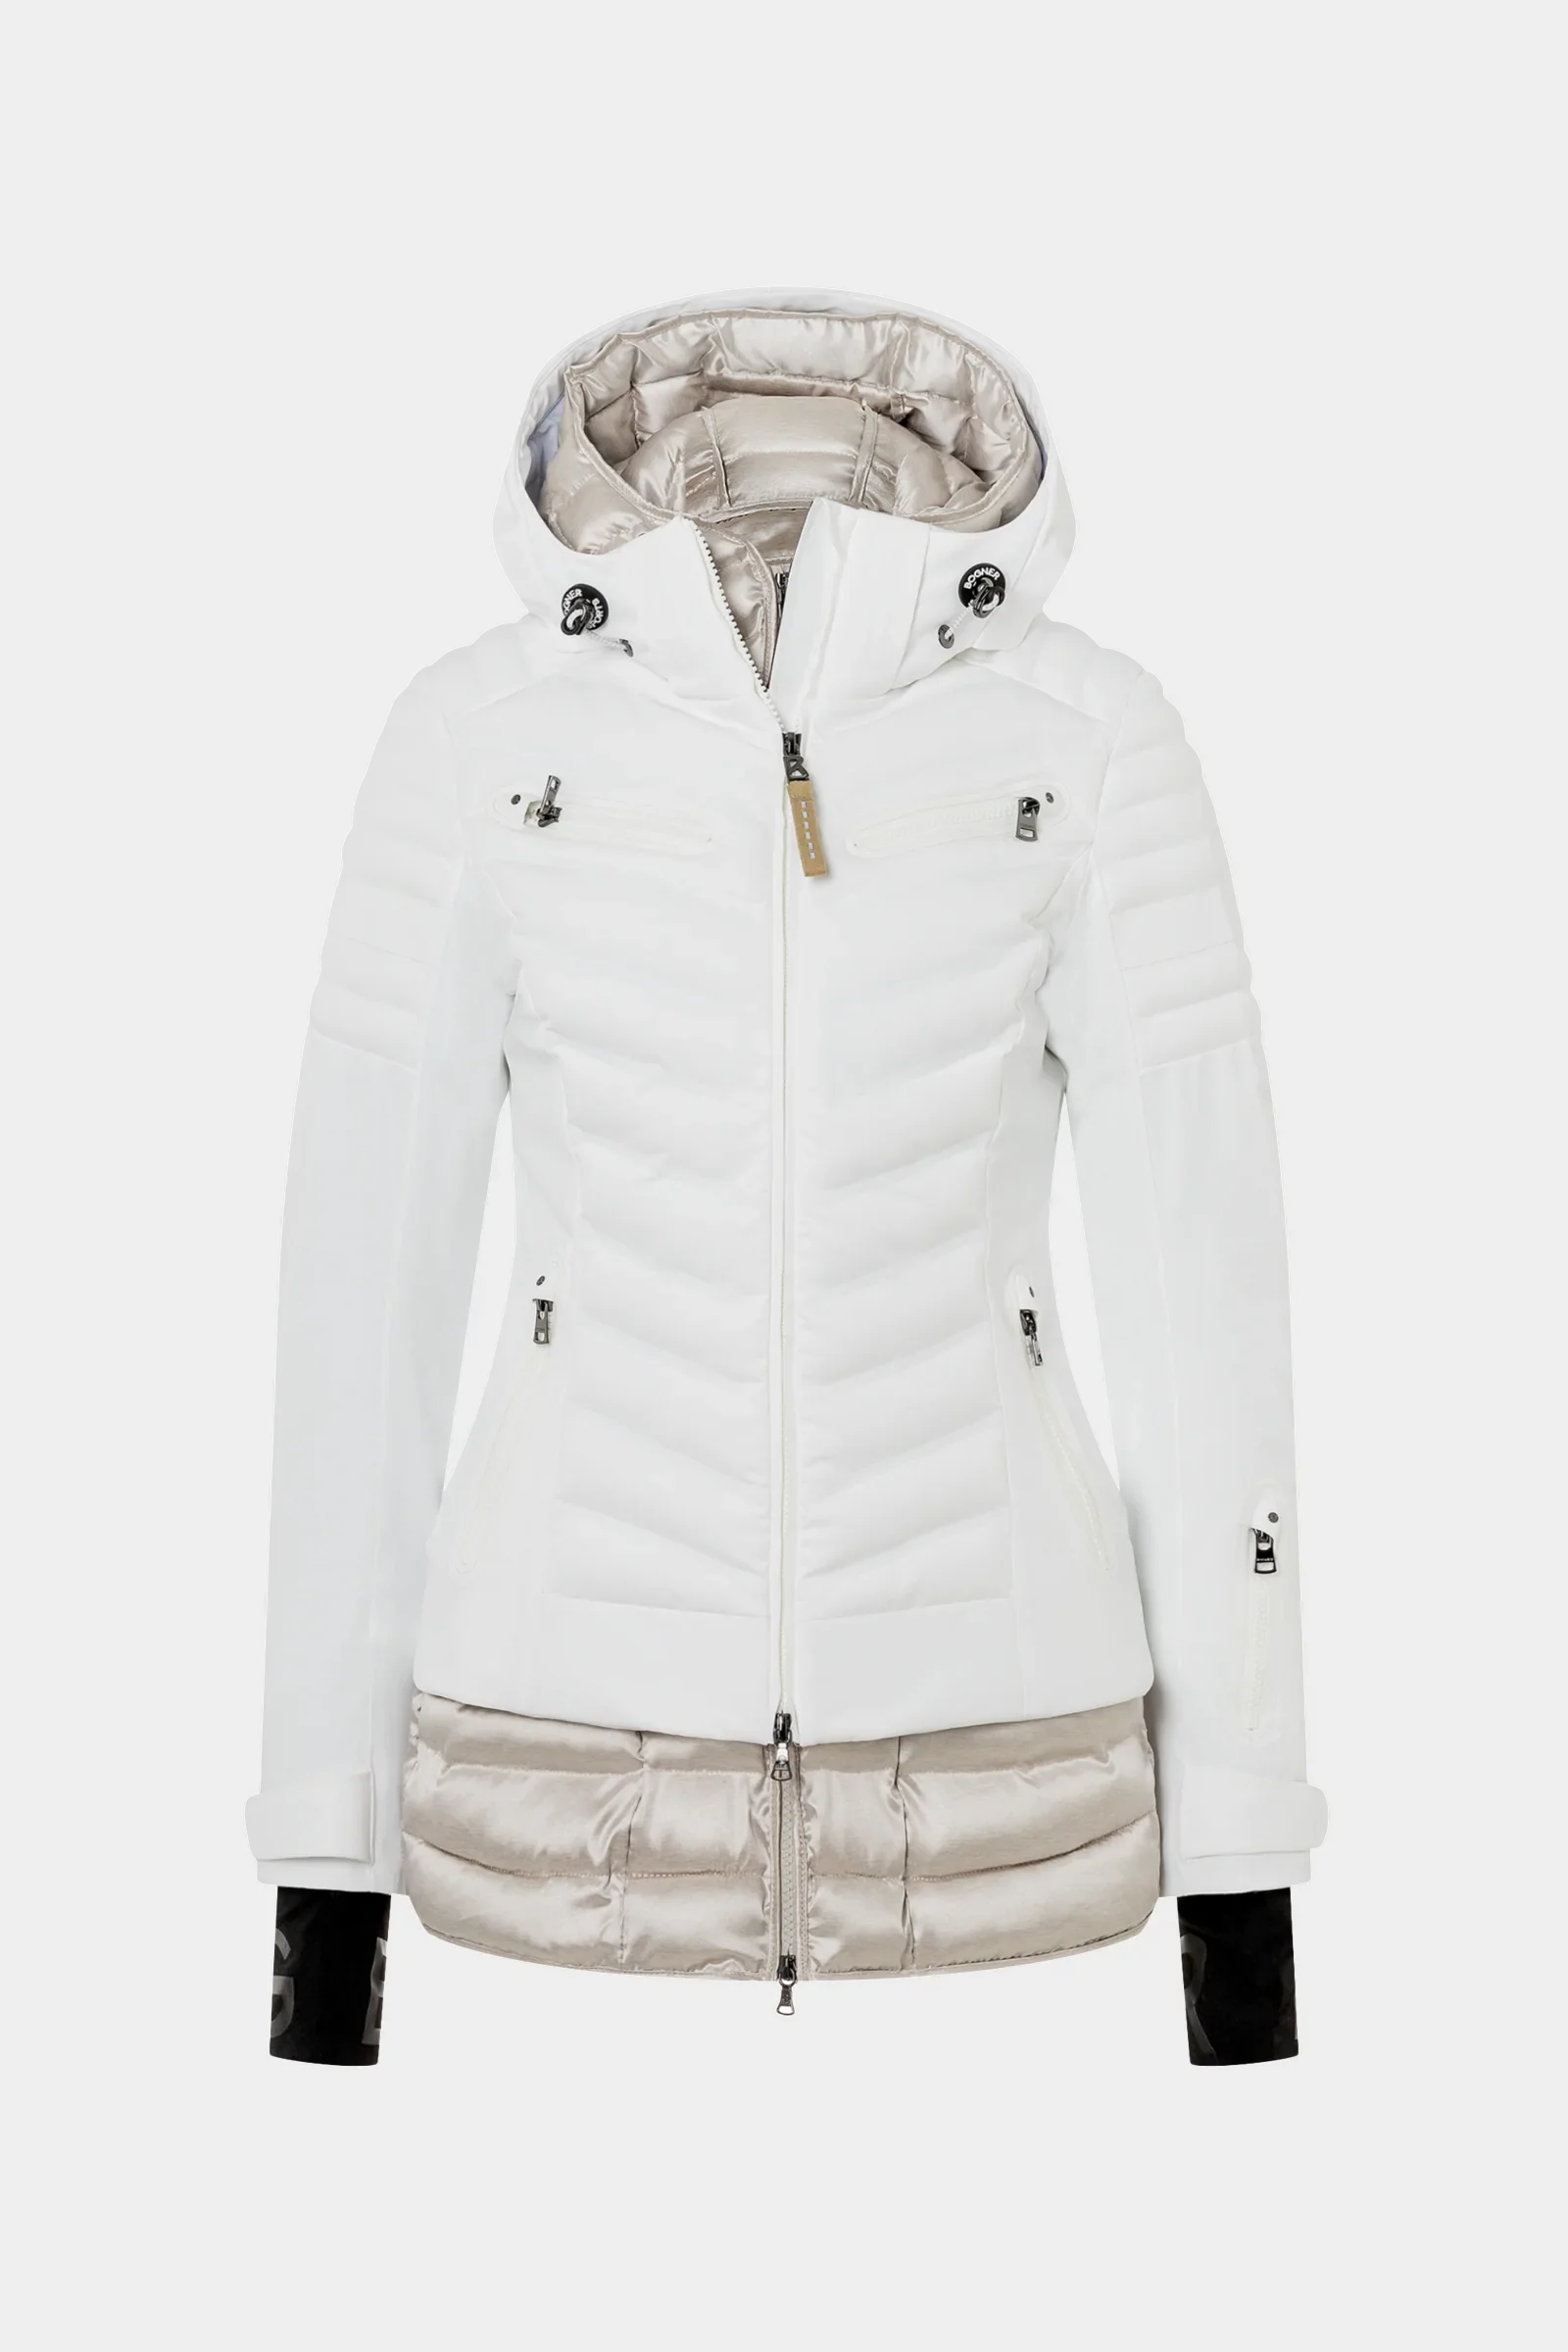 Bogner Micela-T Women's Ski Jacket; Clothes to Perfection